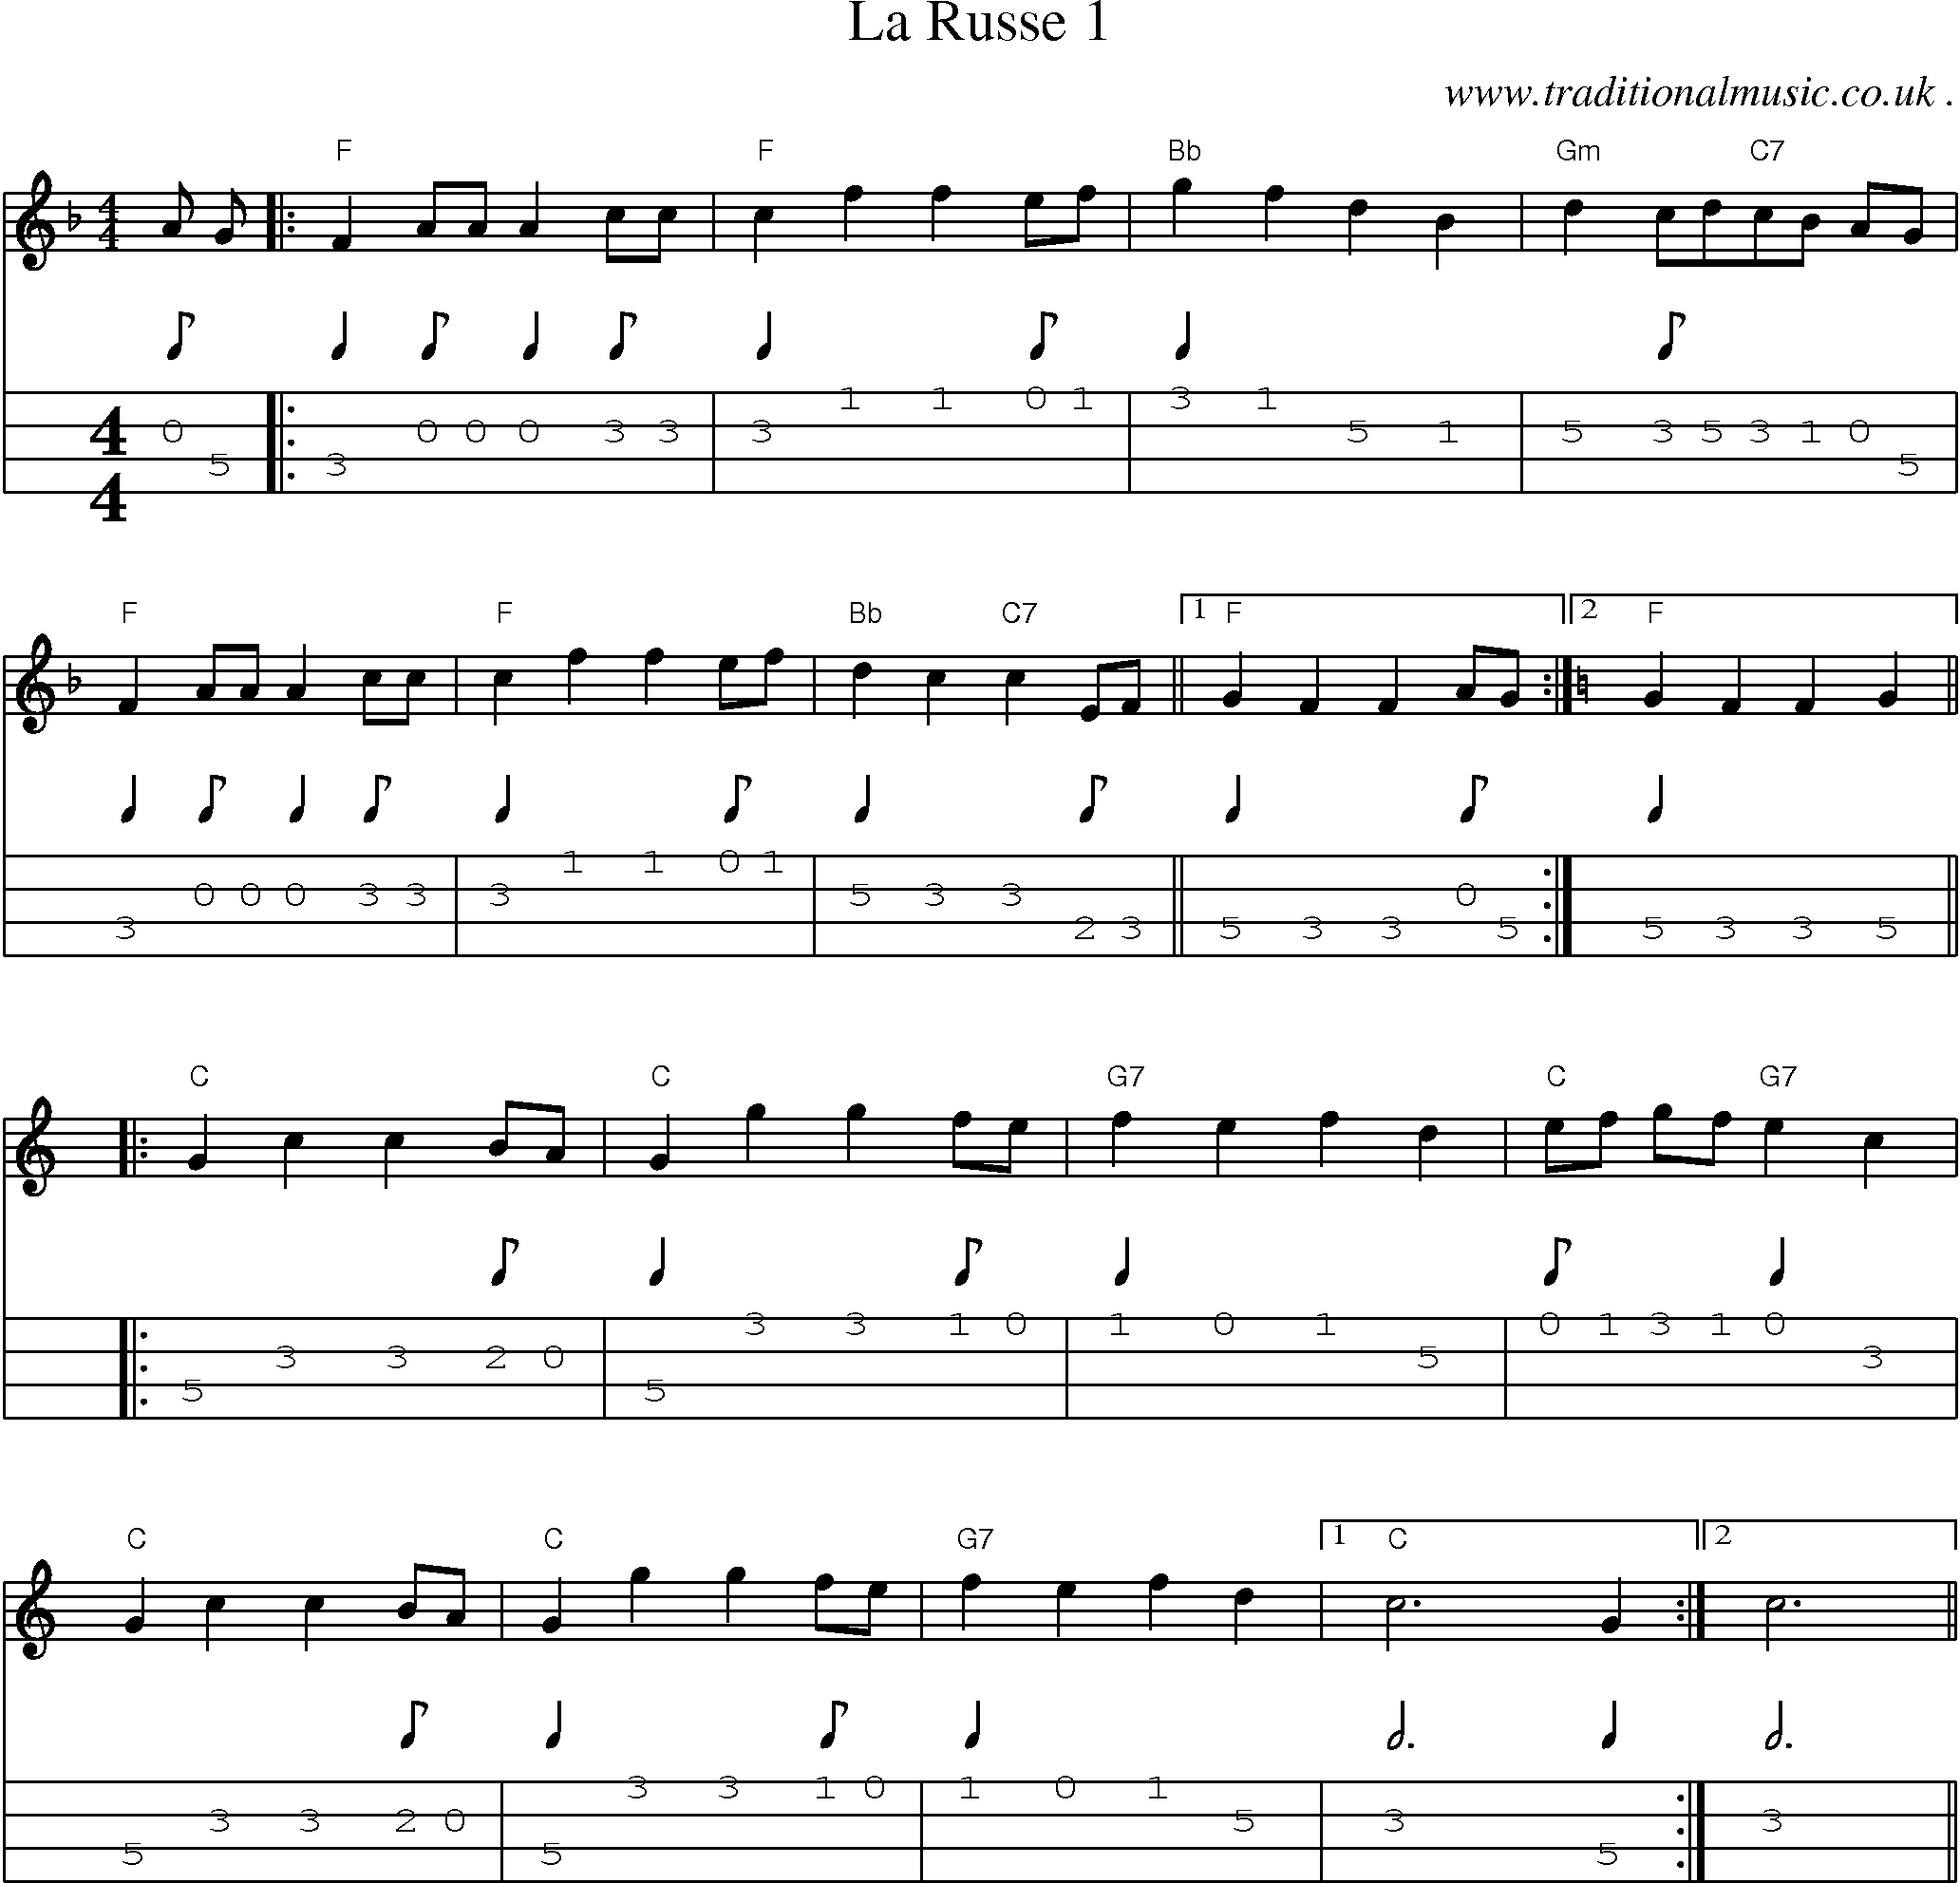 Sheet-Music and Mandolin Tabs for La Russe 1